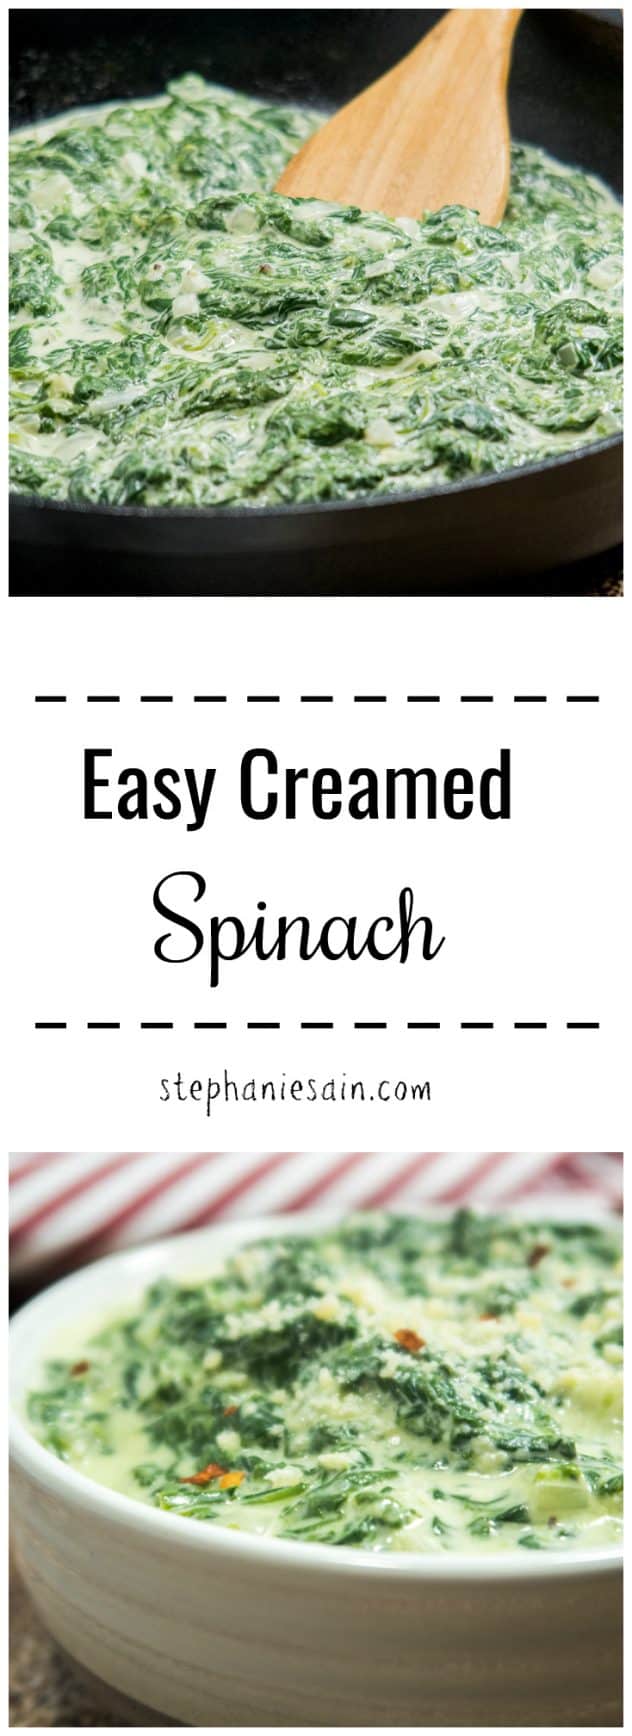 Easy Creamed Spinach is creamy, tasty, & delicious. Perfect to serve with your Holiday meal or any time. Can be ready and on the table in under 15 minutes. Gluten Free & Vegetarian.